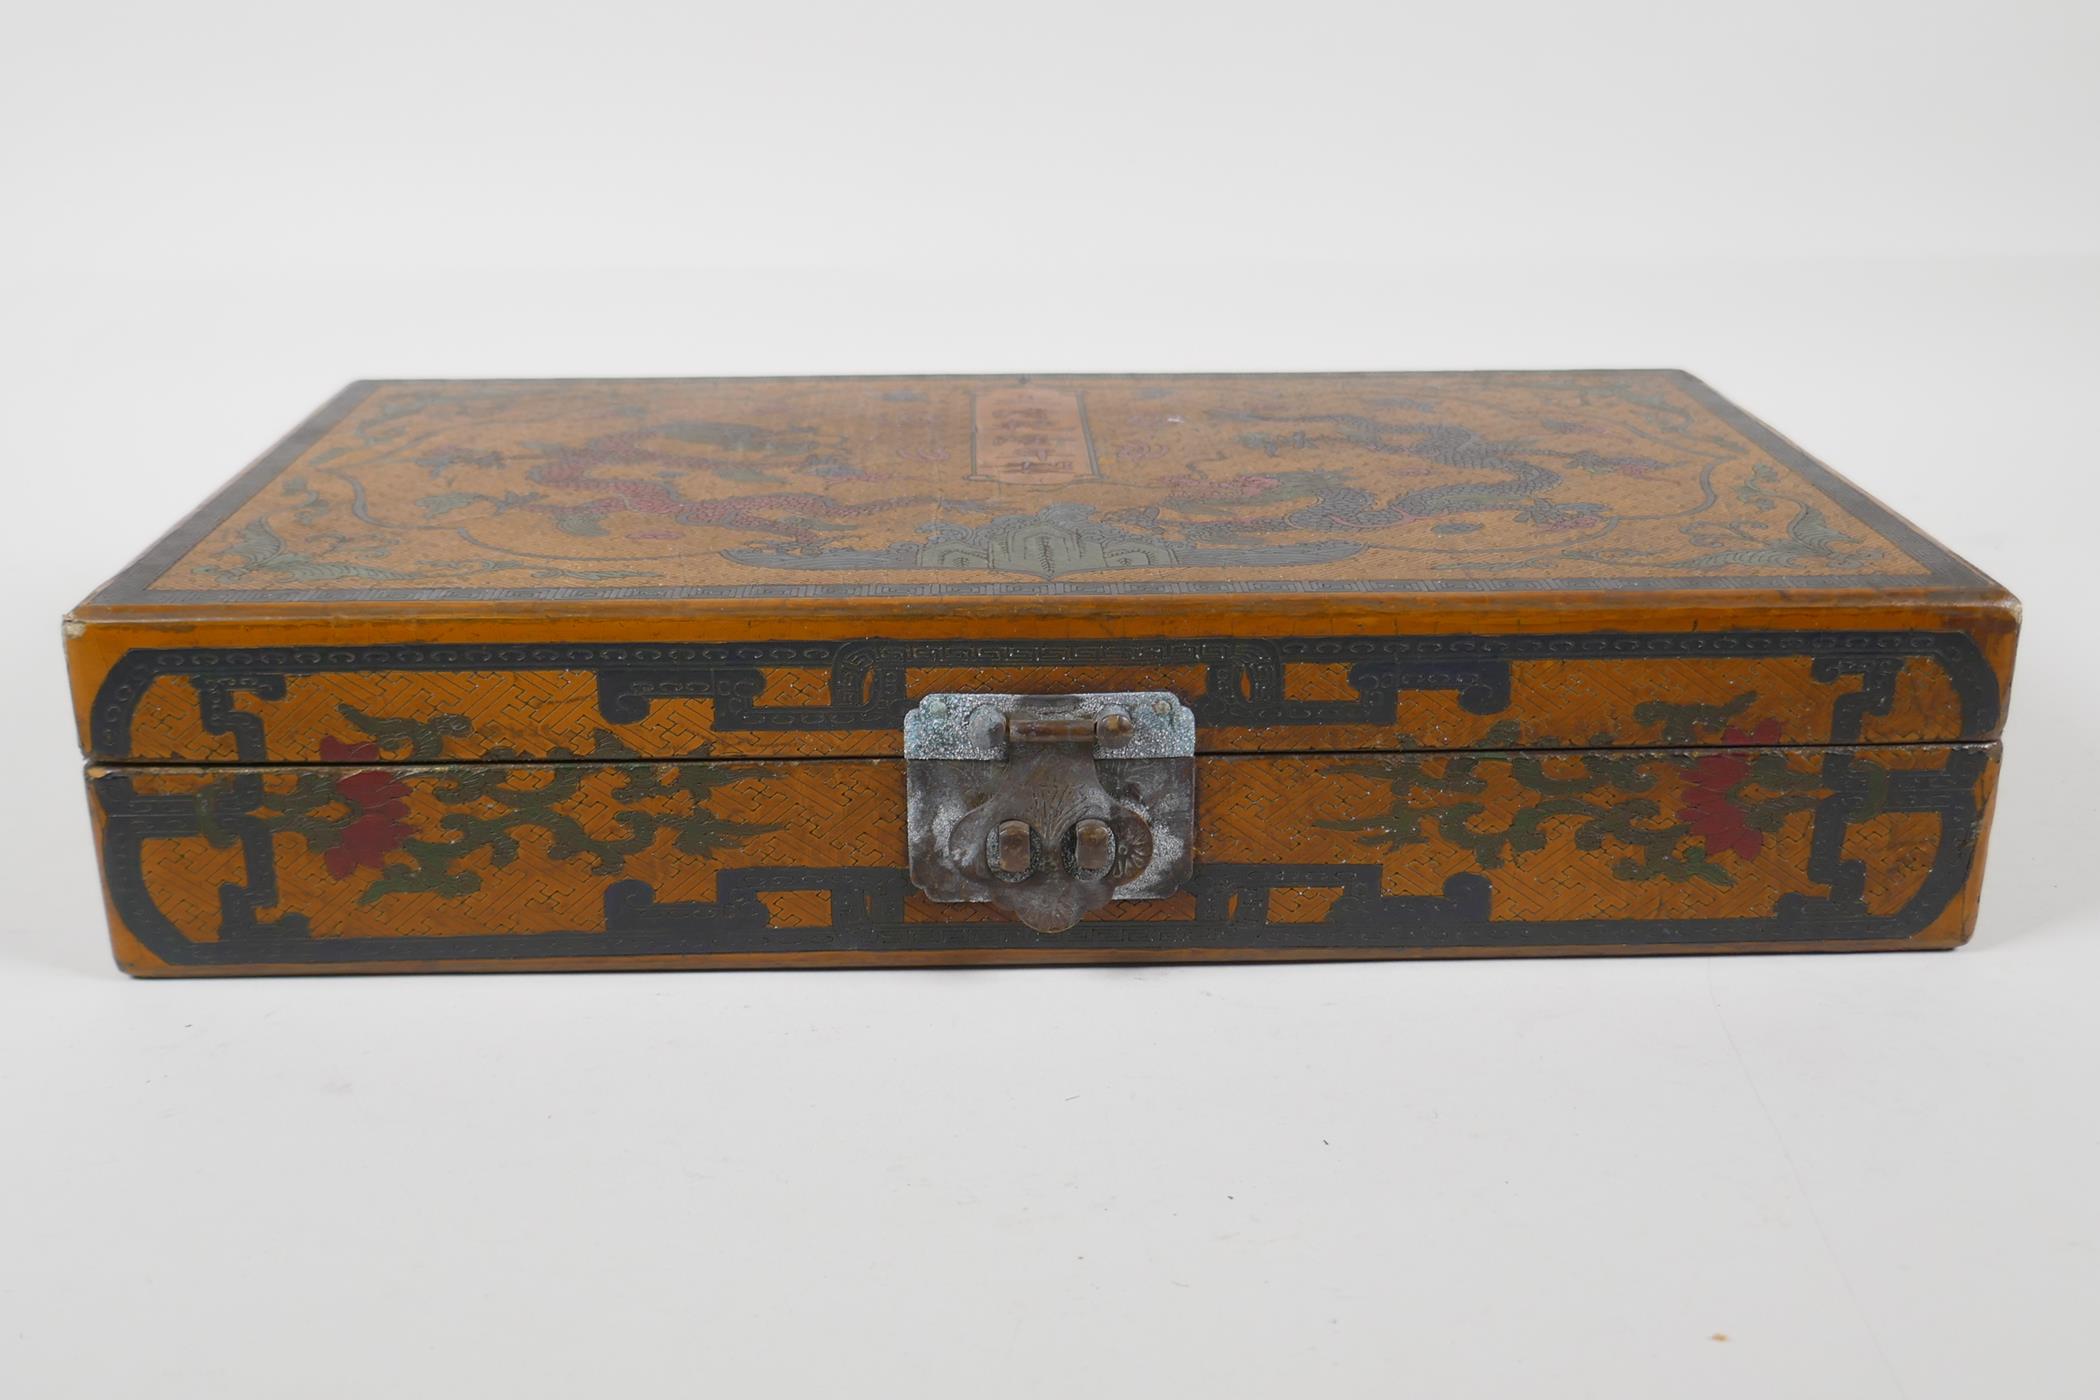 A Chinese ochre ground lacquer box with chased and painted decoration of dragons and character